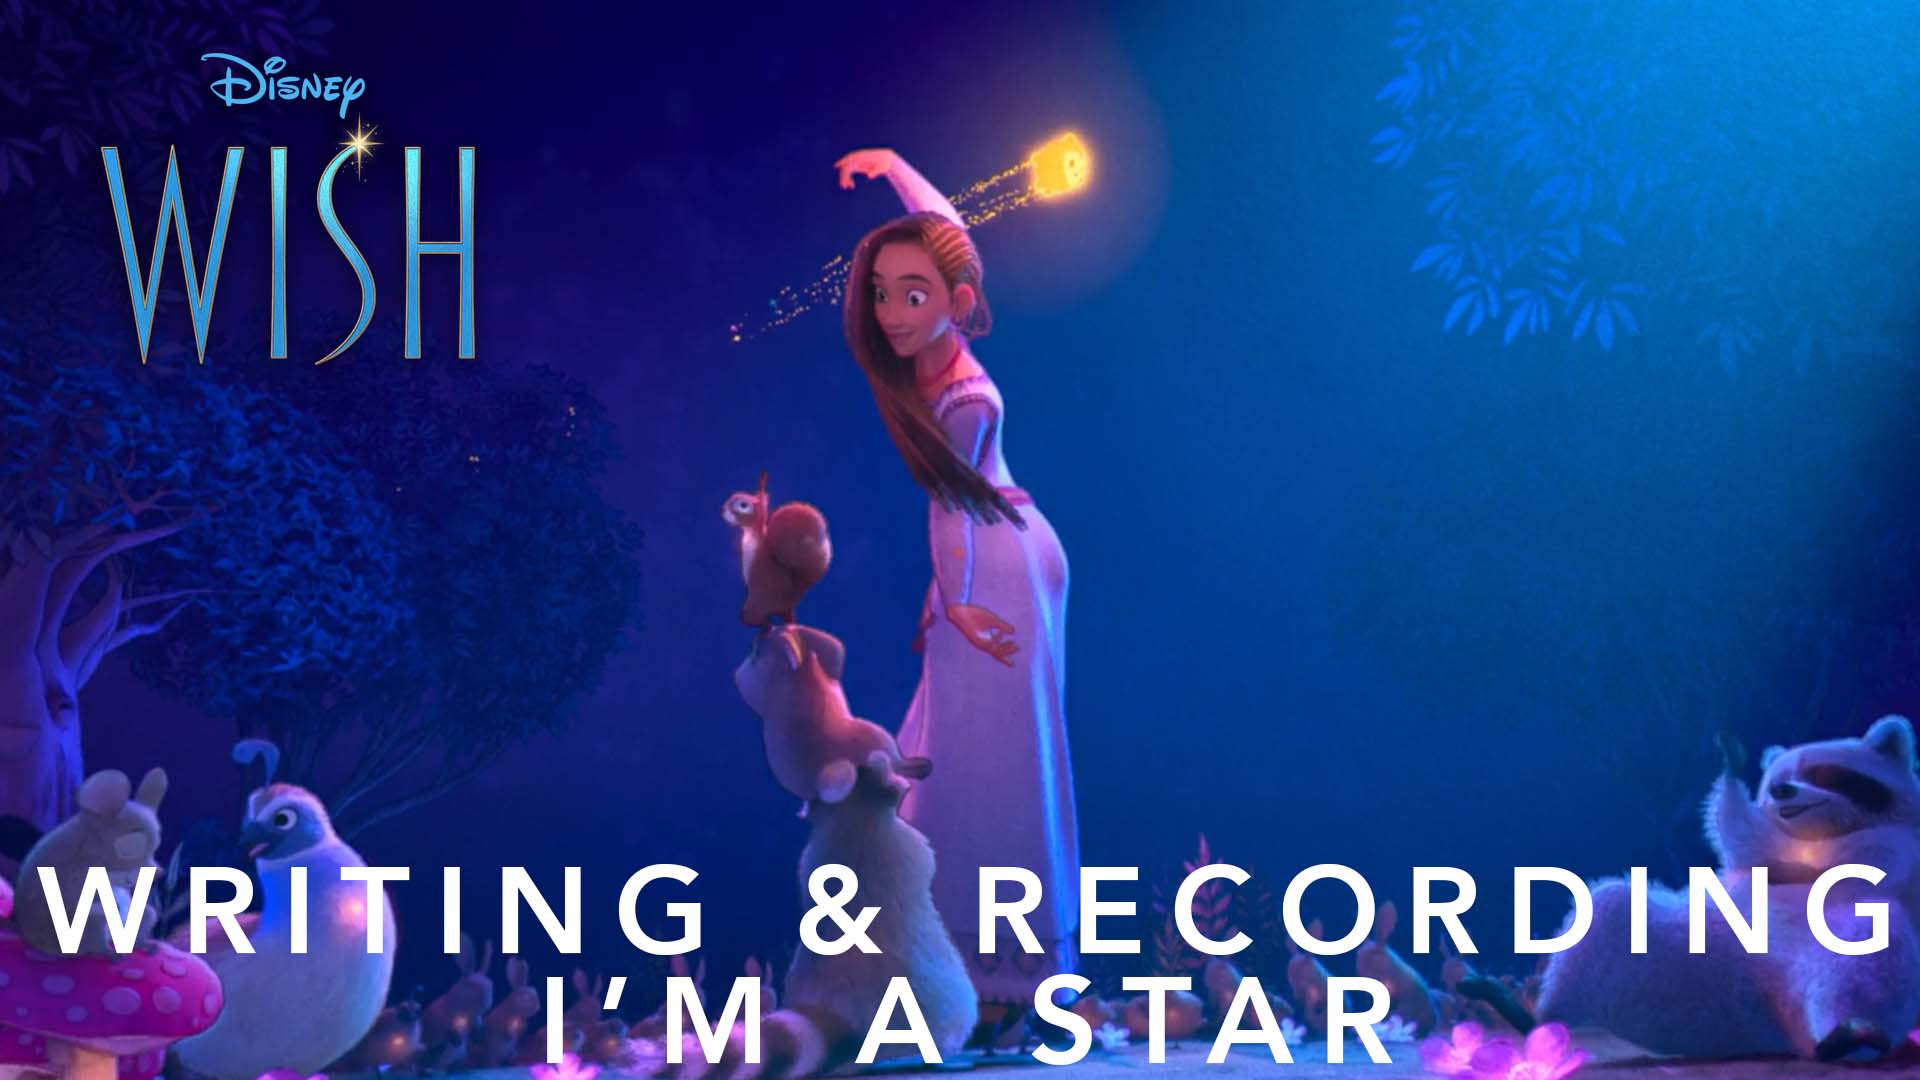 Disney's Wish on X: Make your wish come true and be among the first to  experience Disney's #Wish in theaters, on November 18 at an Early Access  Screening! Get tickets now!